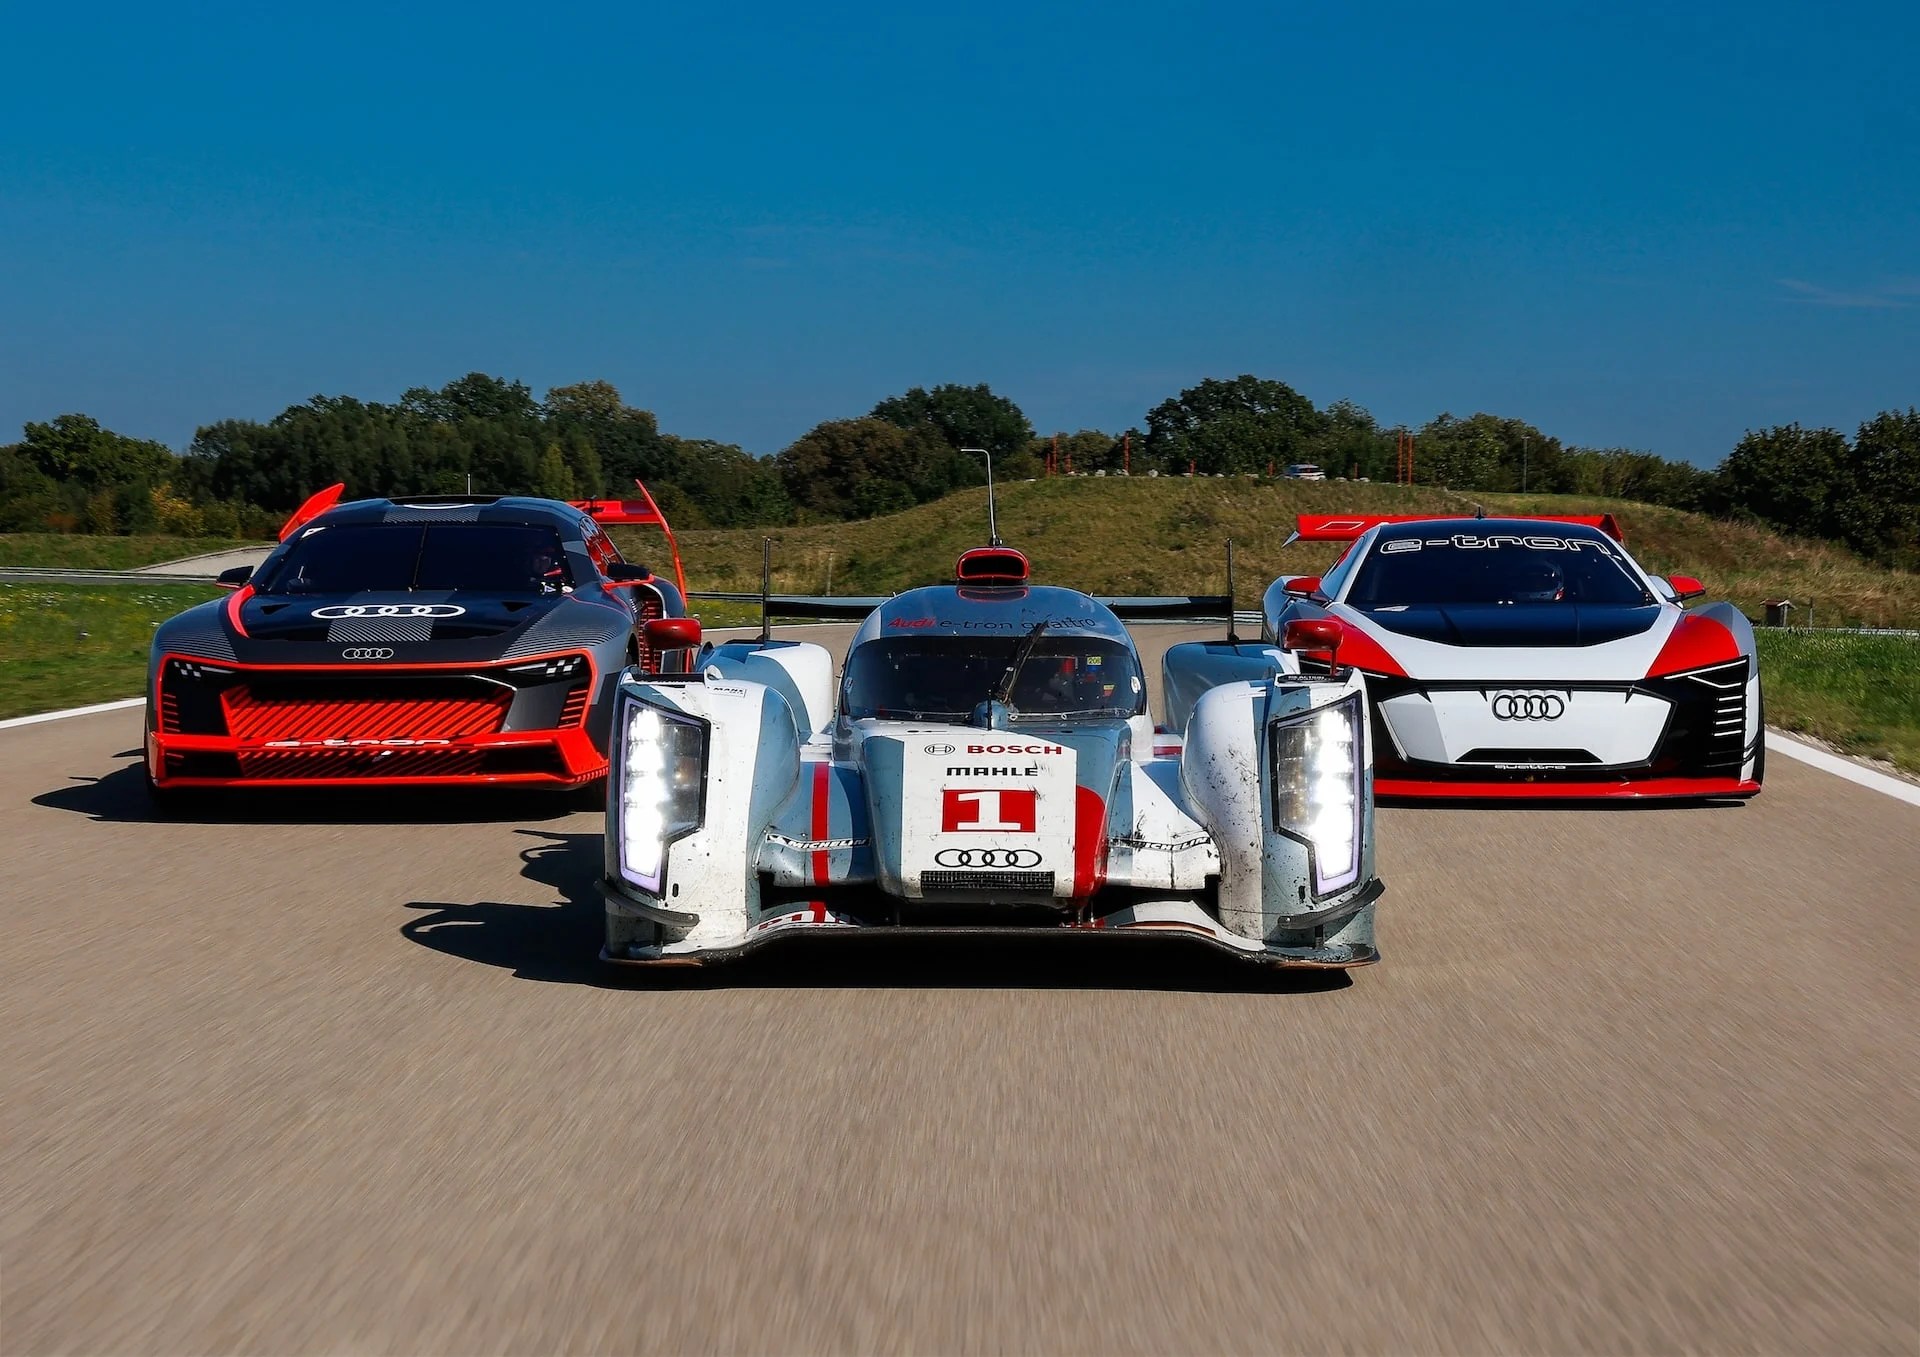 Evolution of Audi’s Electric Race Car Spotlighted in Showcase